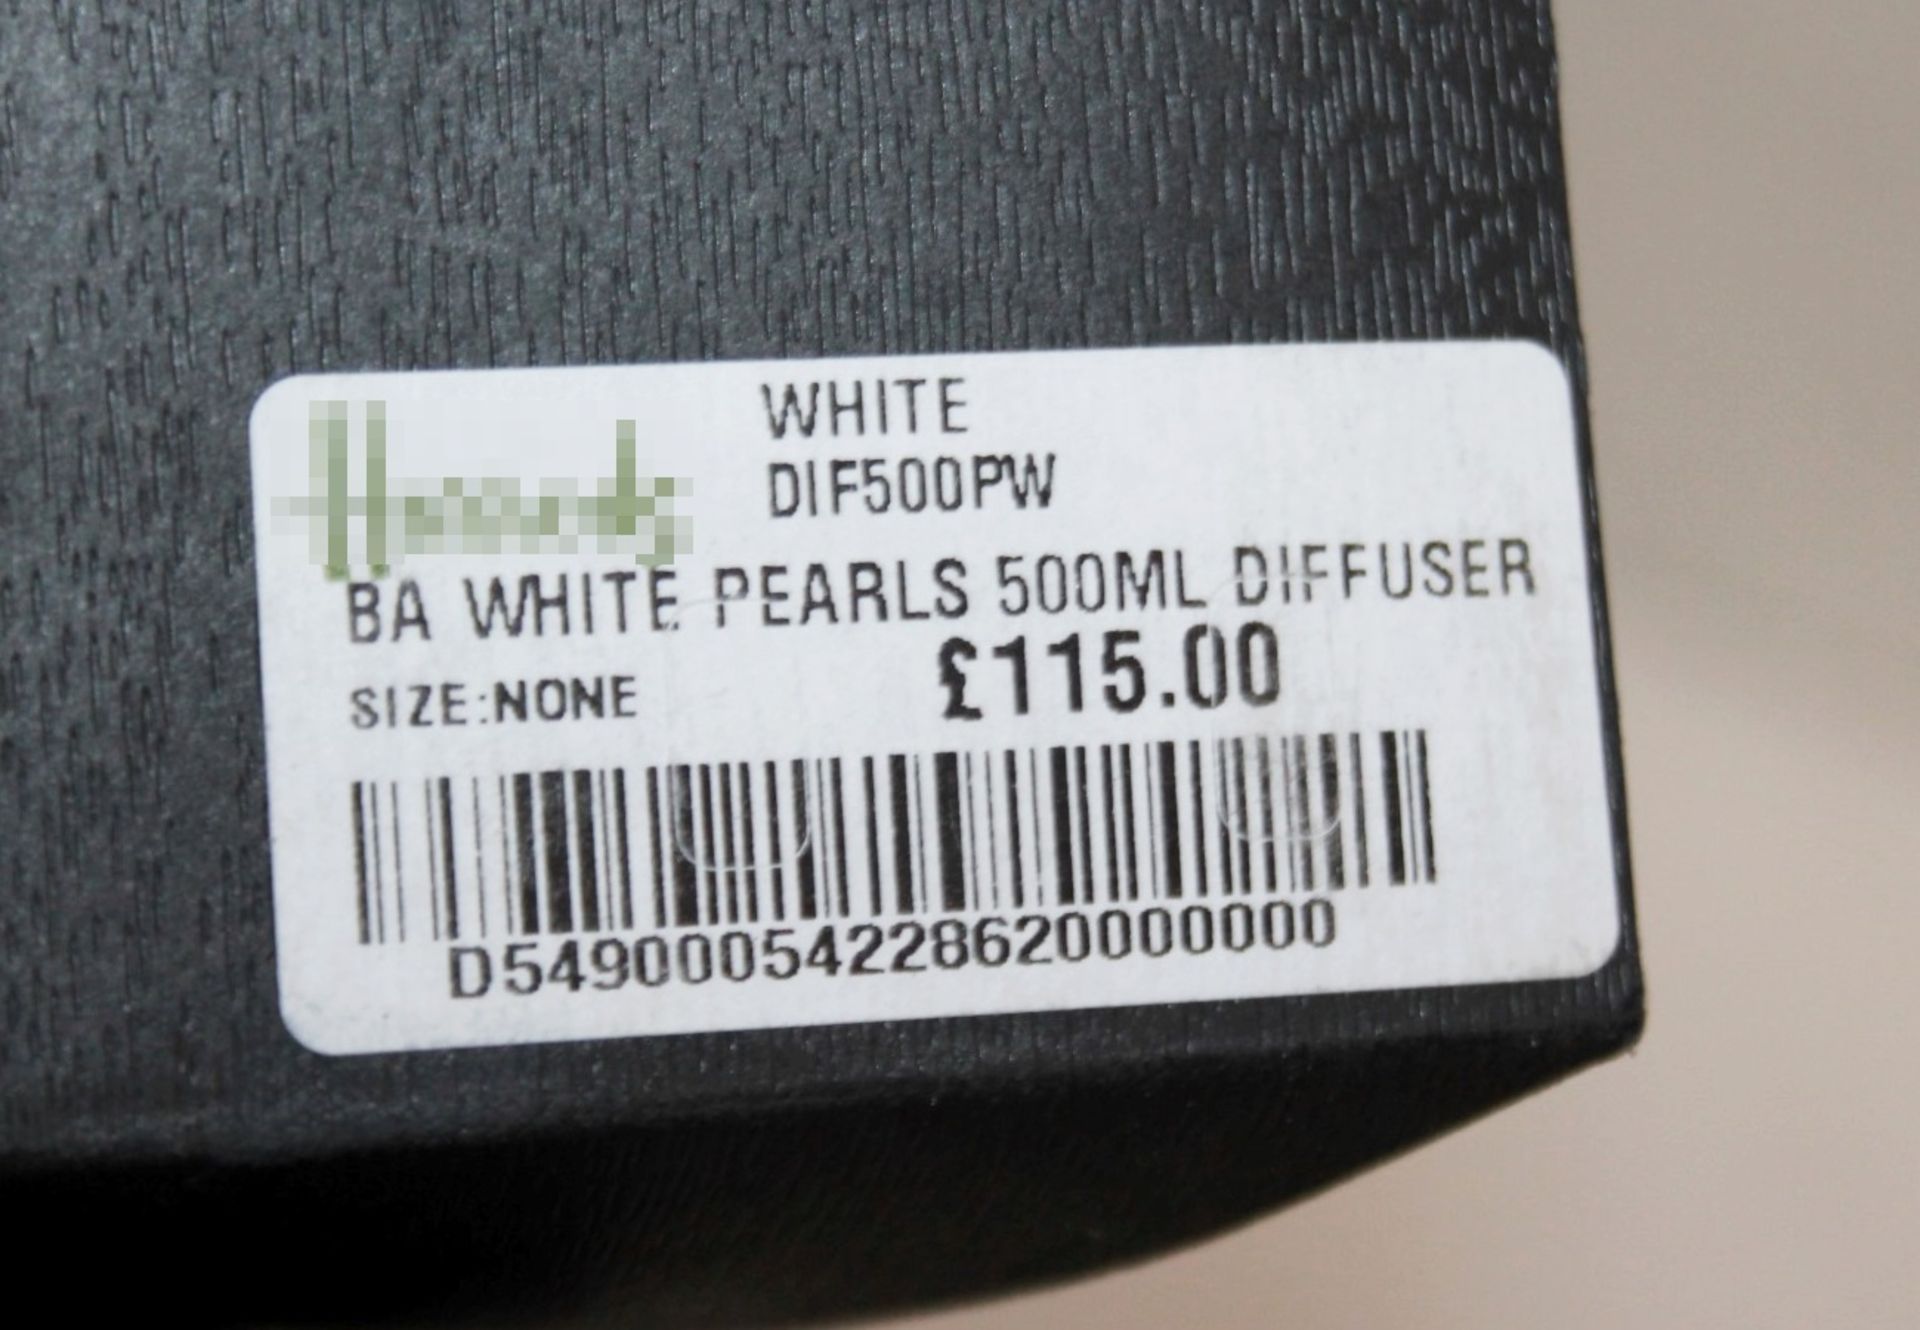 1 x BAOBAB COLLECTION 'White Pearls' Luxury Diffuser (500ml) - Original Price £115.00 - Unused Boxed - Image 4 of 6